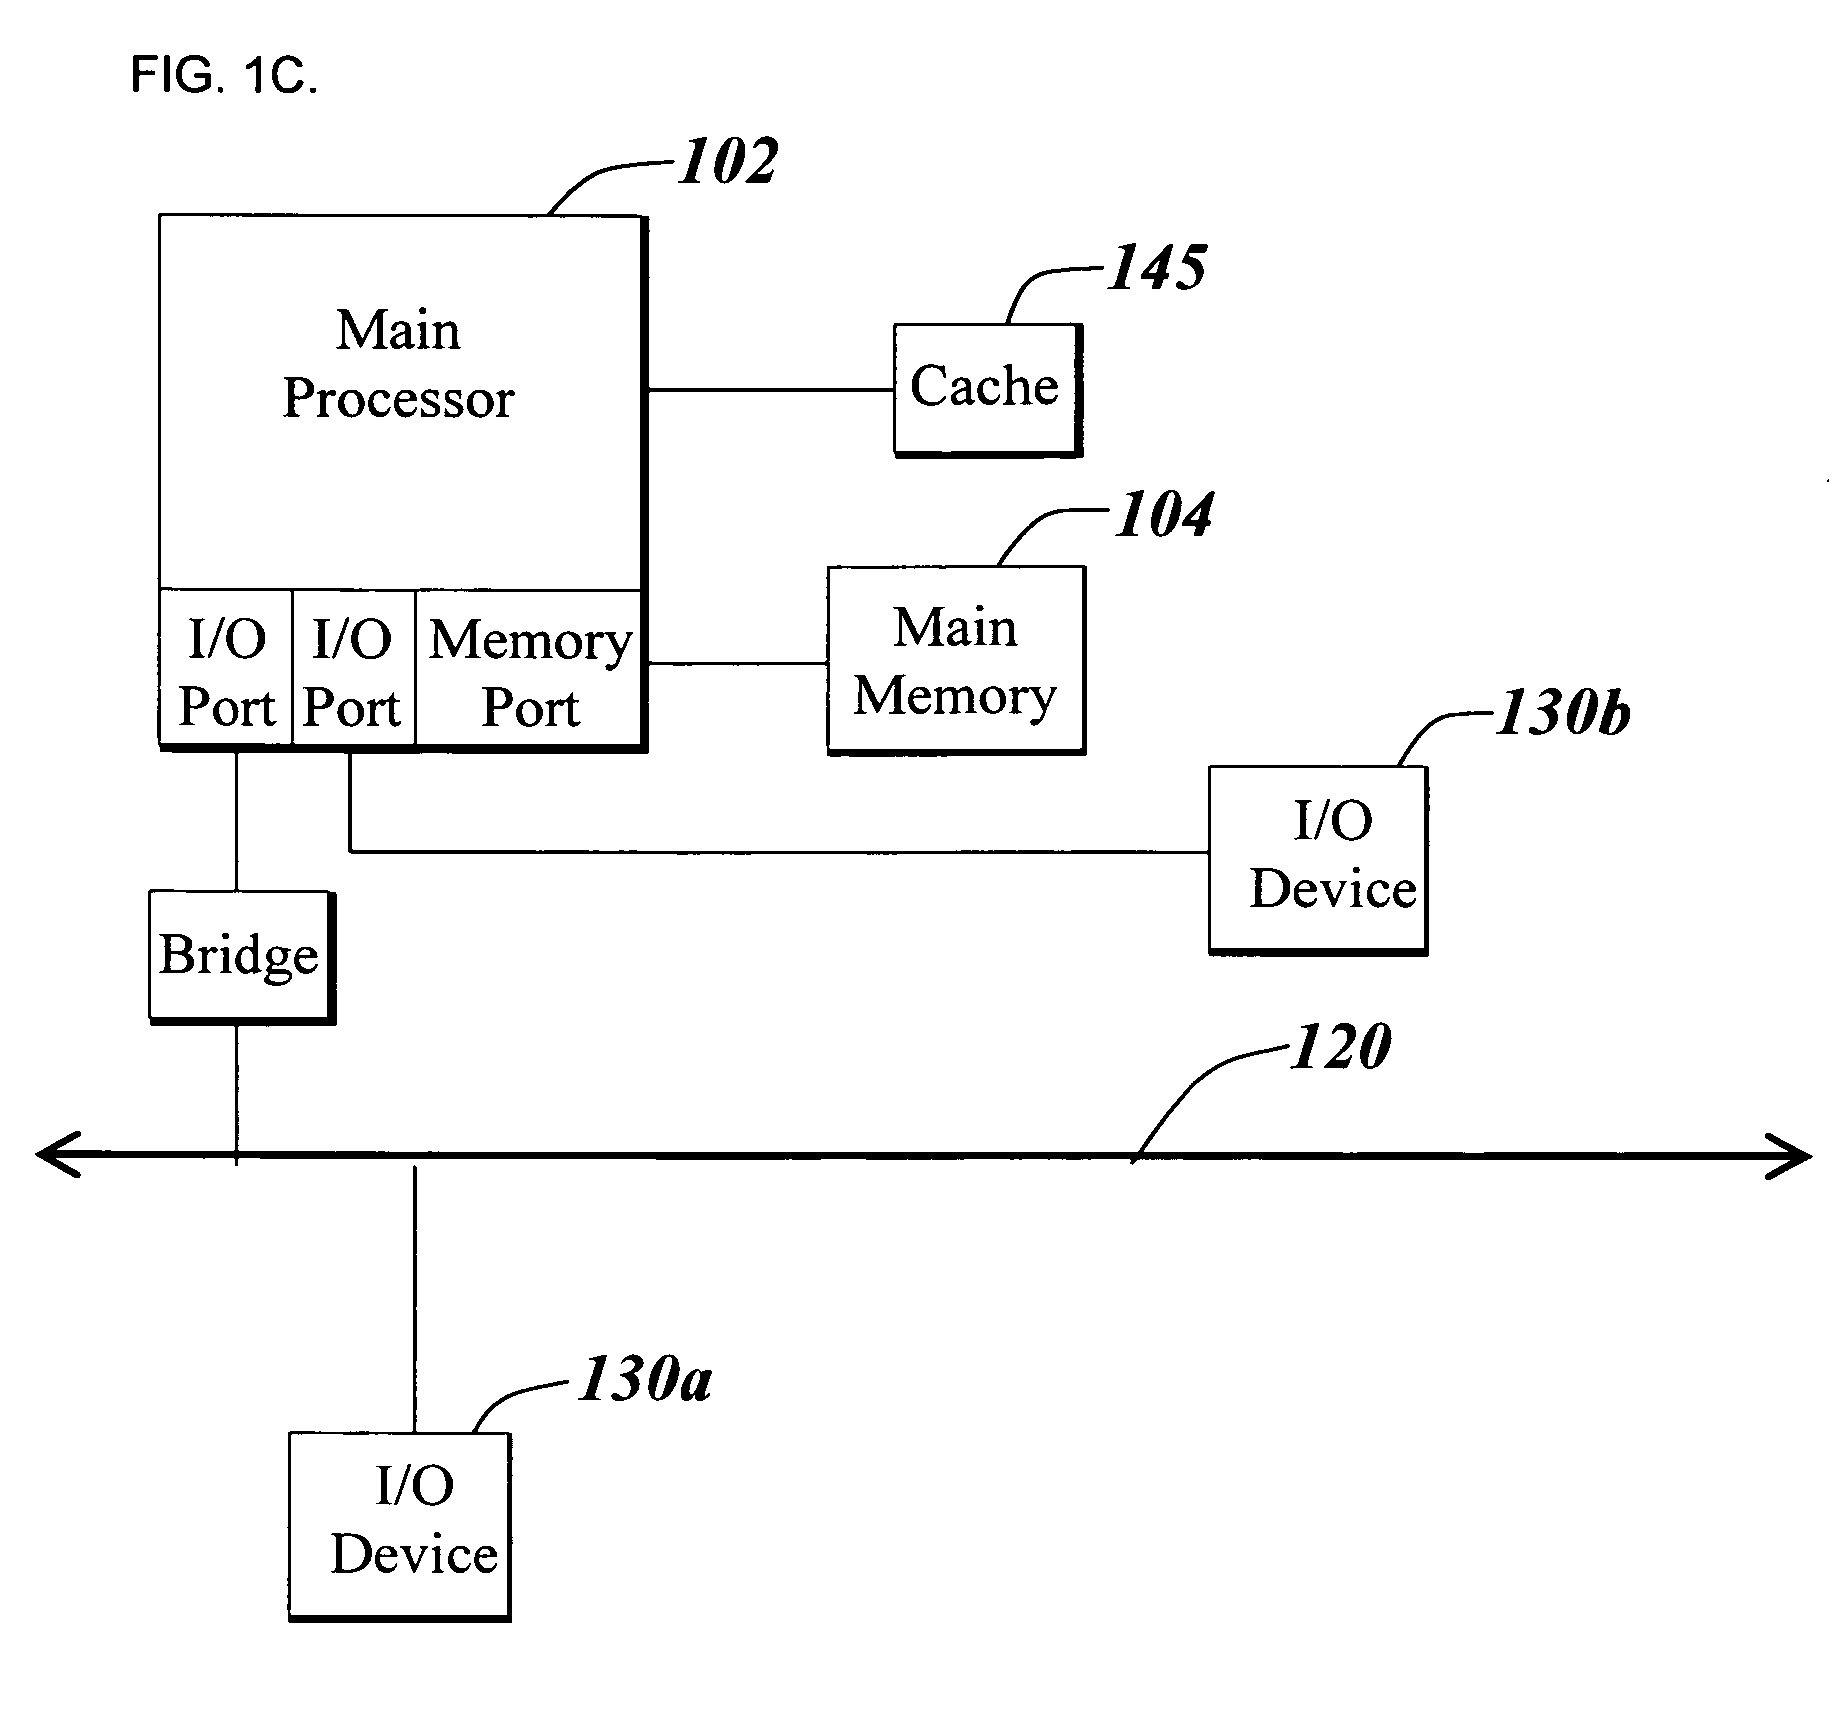 Methods and systems for generating playback instructions for rendering of a recorded computer session